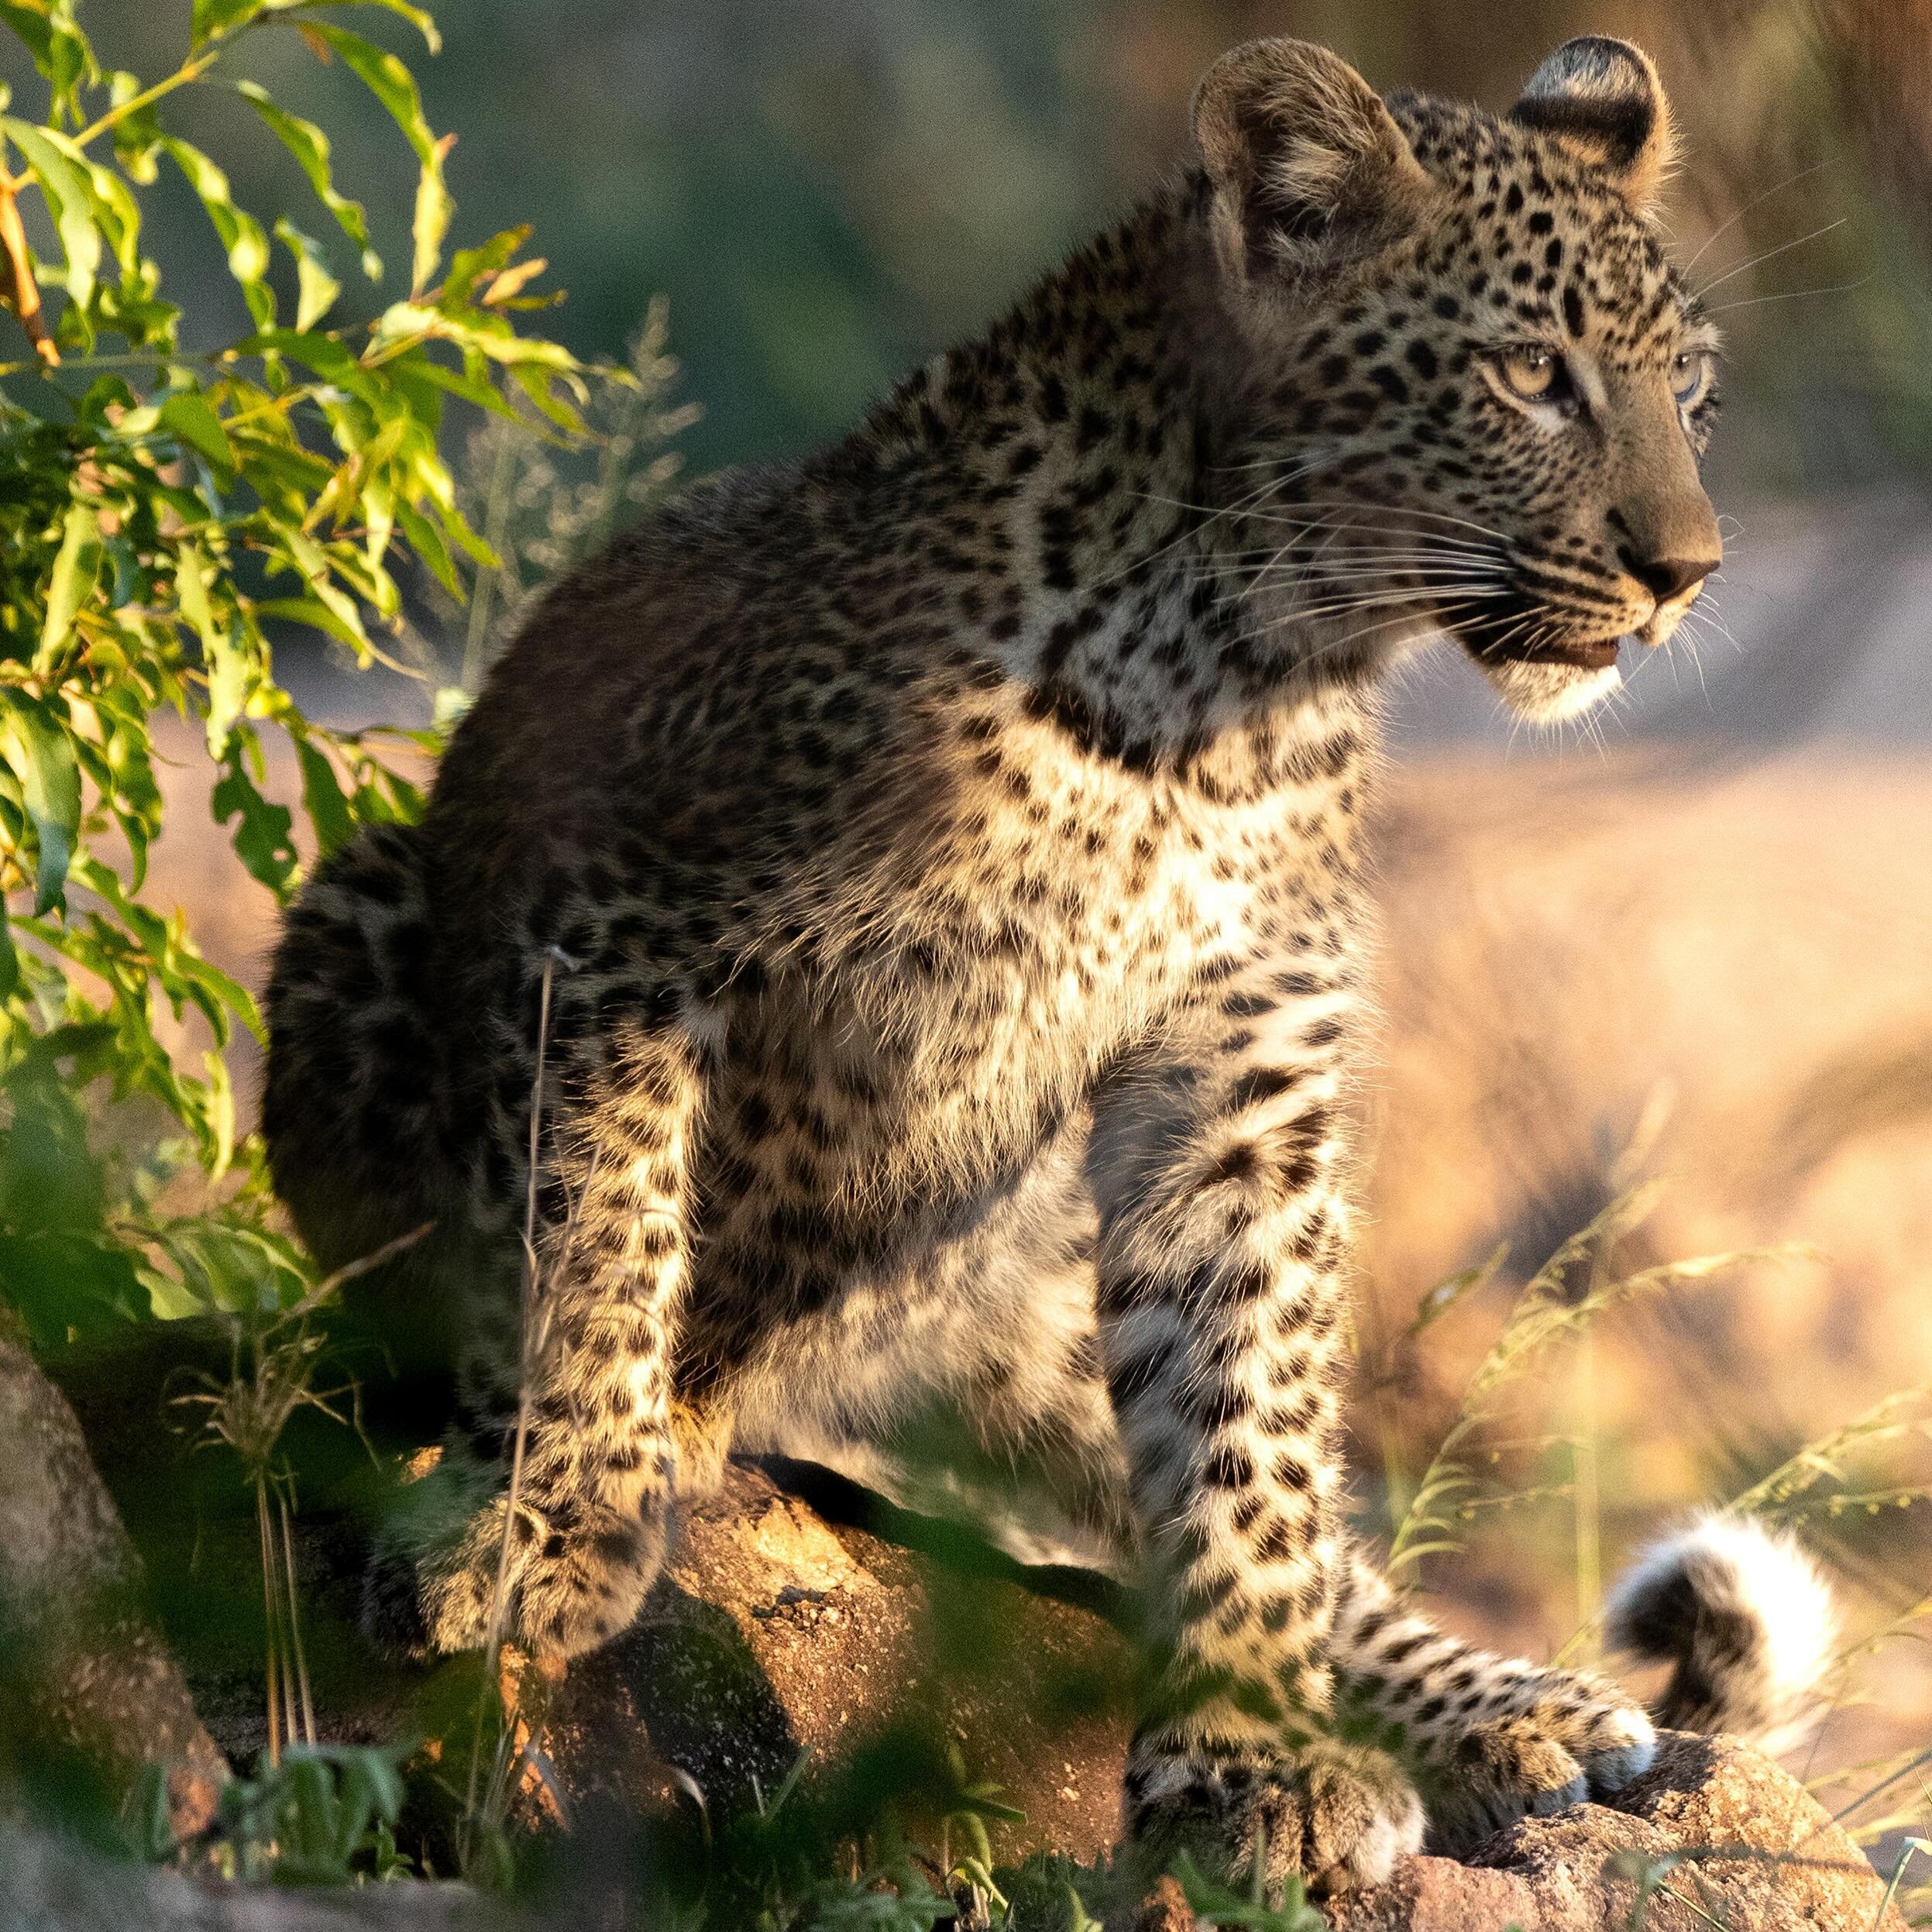 Young leopards are often left on their own even from a very young age. This little one was happy as a lark, basking in the sun, chasing birds and rolling around in the tall grass. Mom will be back at some point to fetch them but for now they have to 